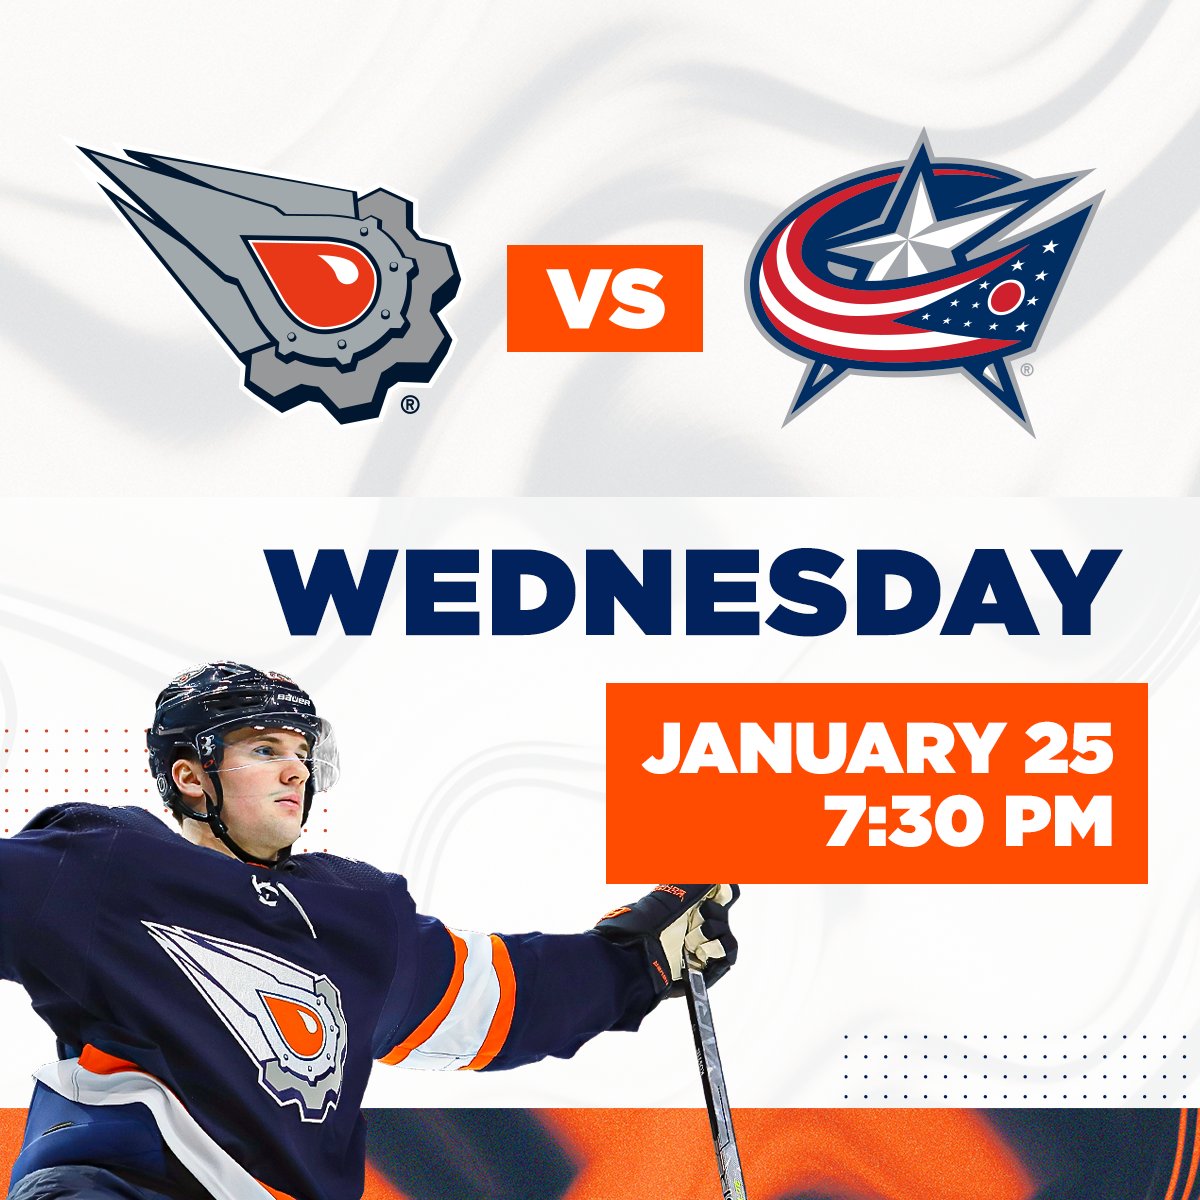 🚨 TICKET GIVEAWAY 🚨 Want a chance to win a pair of tickets to #Oilers vs. Blue Jackets on Wednesday? Follow us, retweet & reply with who you would bring to the game to be entered to win! Buy tickets now to guarantee your seat: EdmontonOilers.com/Tickets